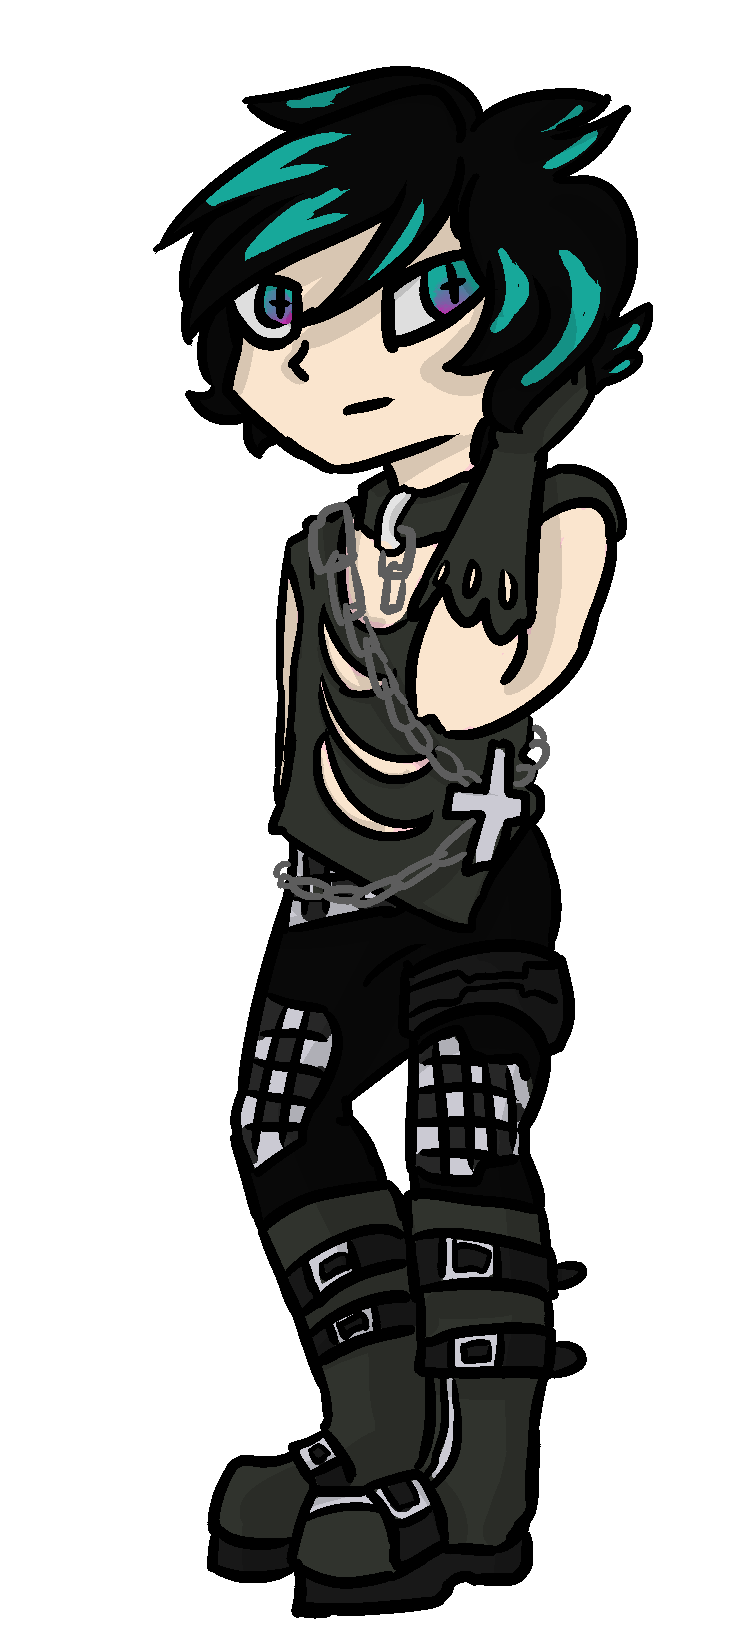 emo_boi_by_guardianwolfs-dc308no.png